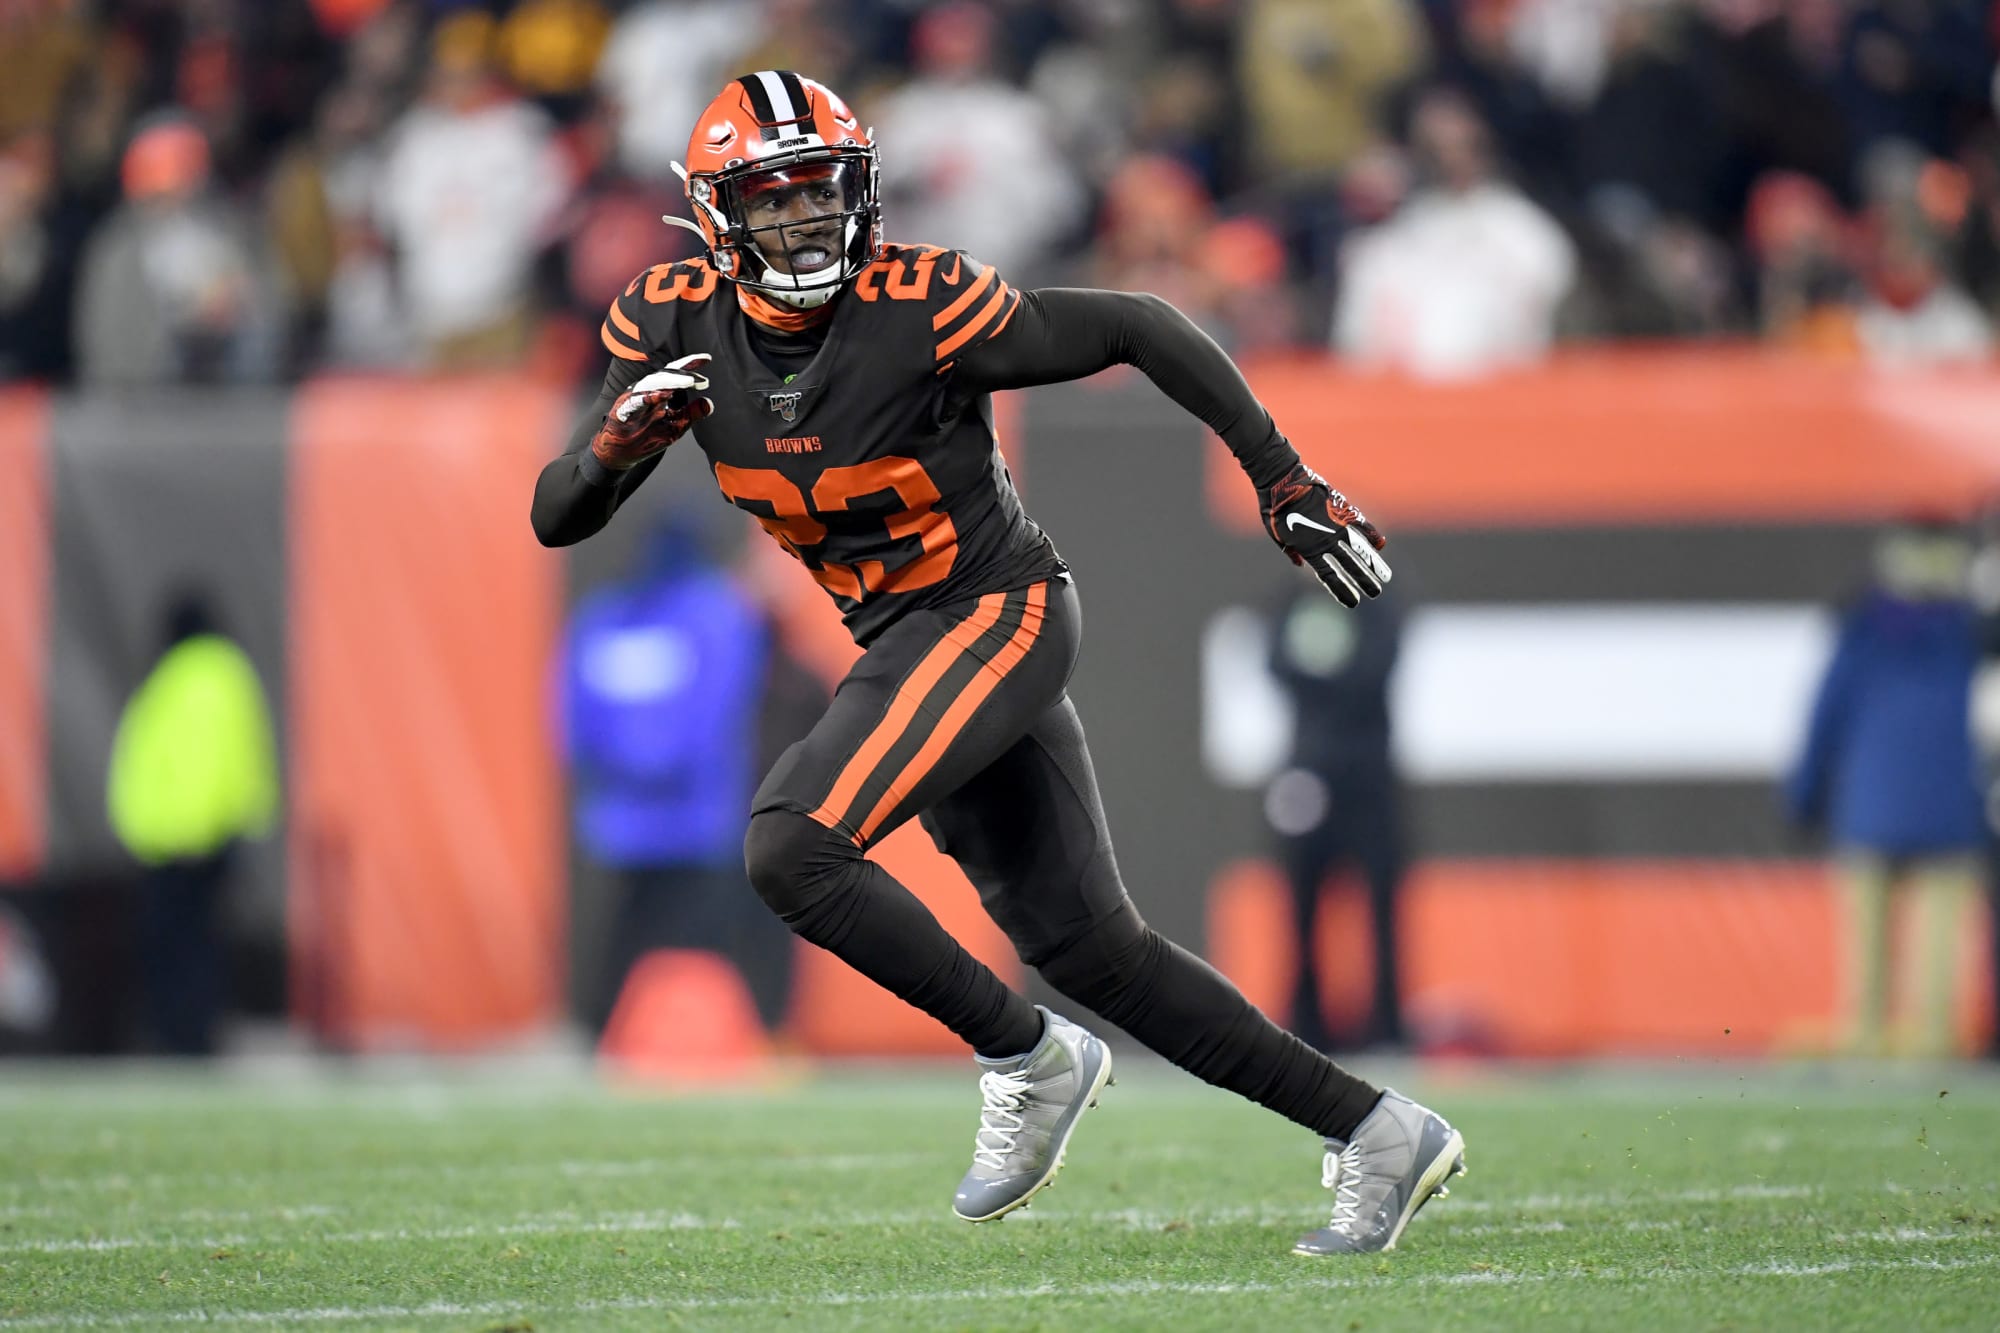 Raiders: Damarious Randall signing solidifies the safety position